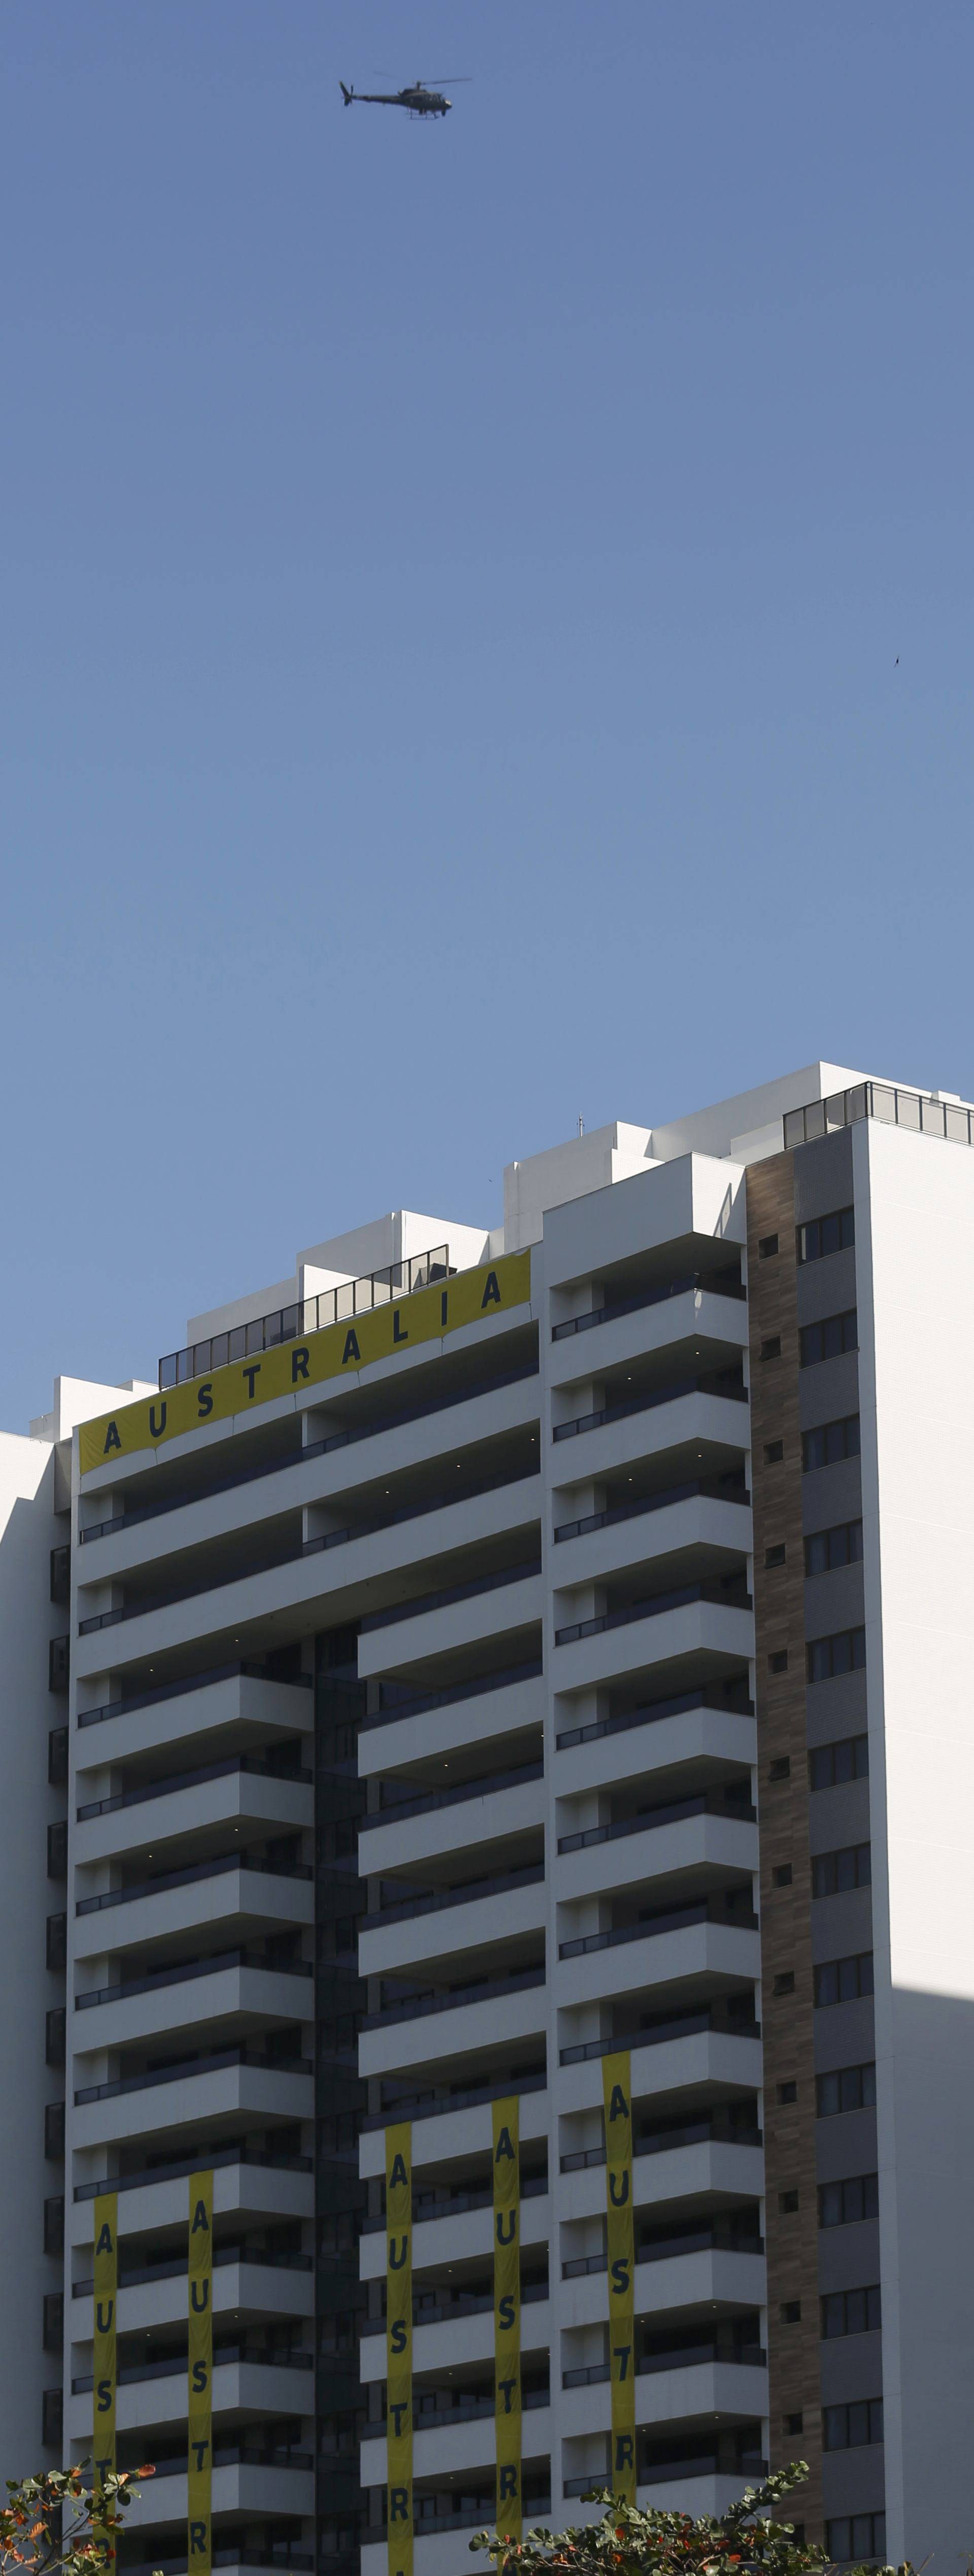 A view of one of the blocks of apartments where Australian athletes are supposed to stay in Rio de Janeiro